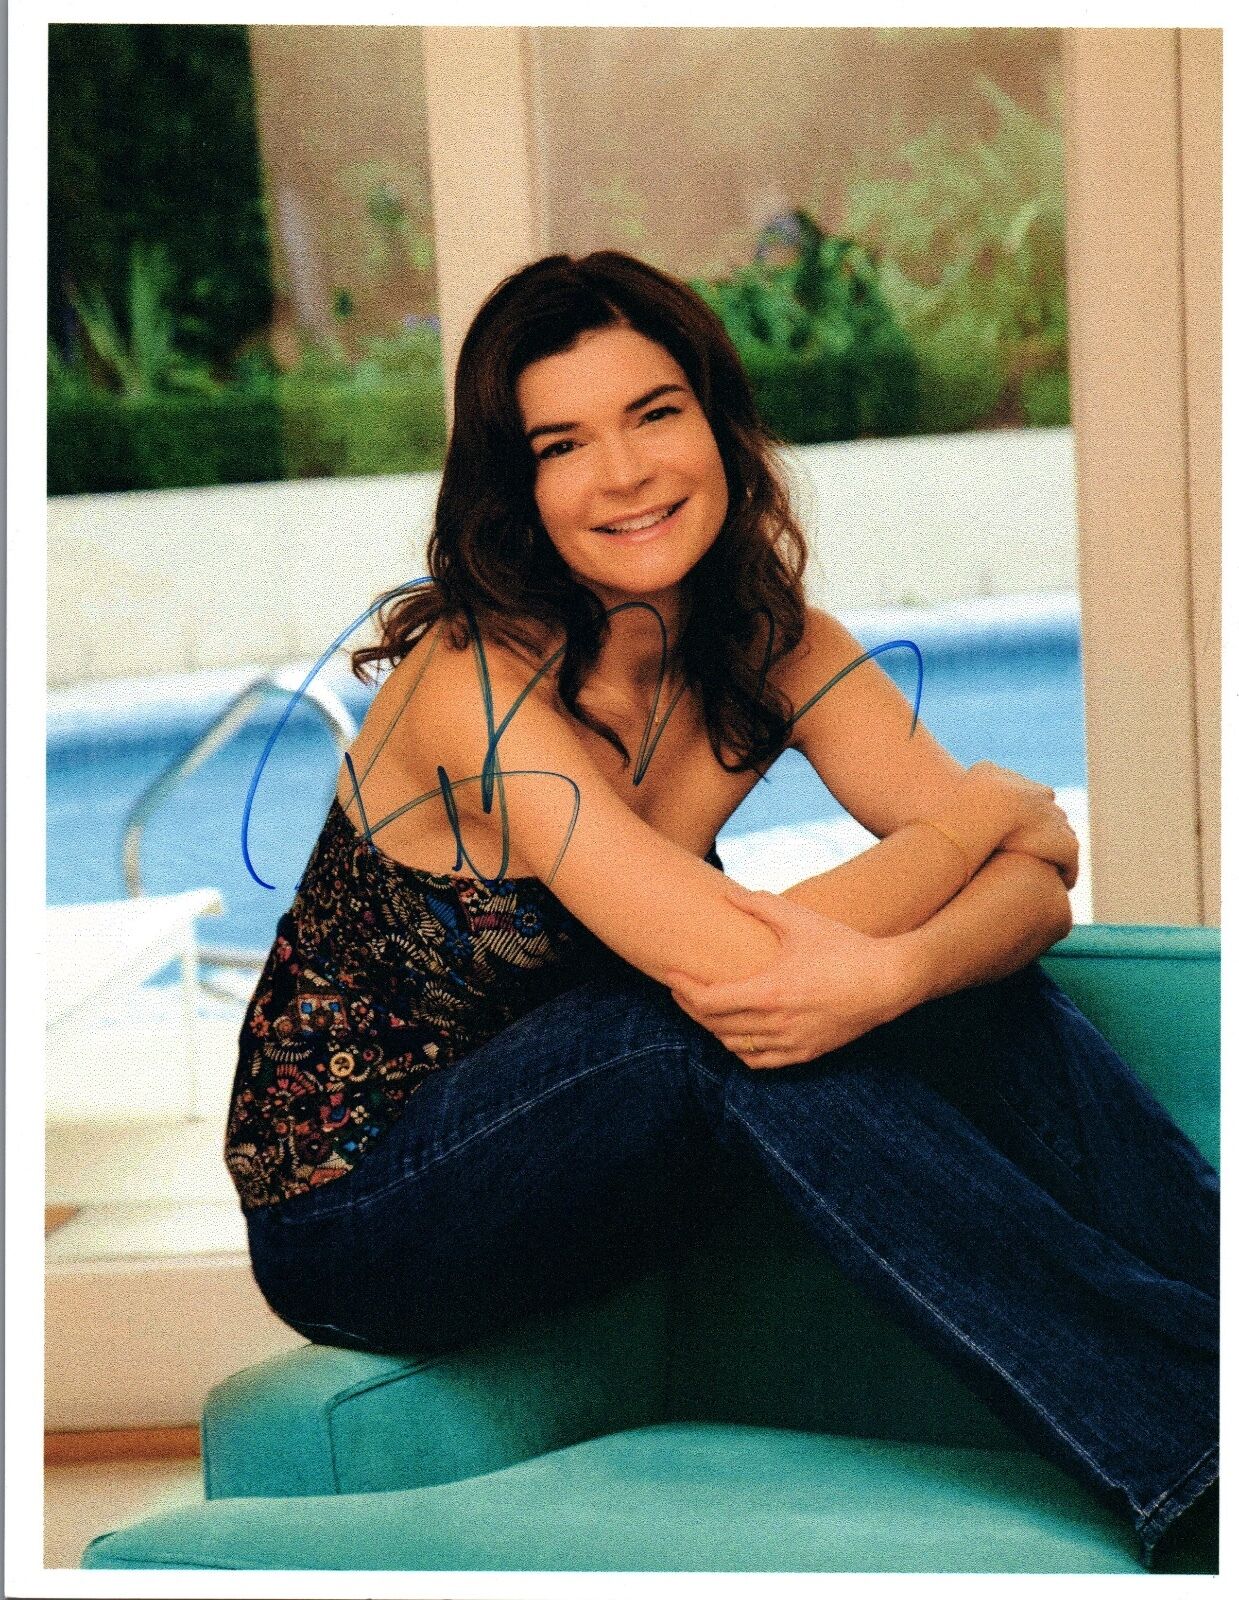 Betsy Brandt Signed Autographed 8x10 Photo Poster painting Breaking Bad COA VD